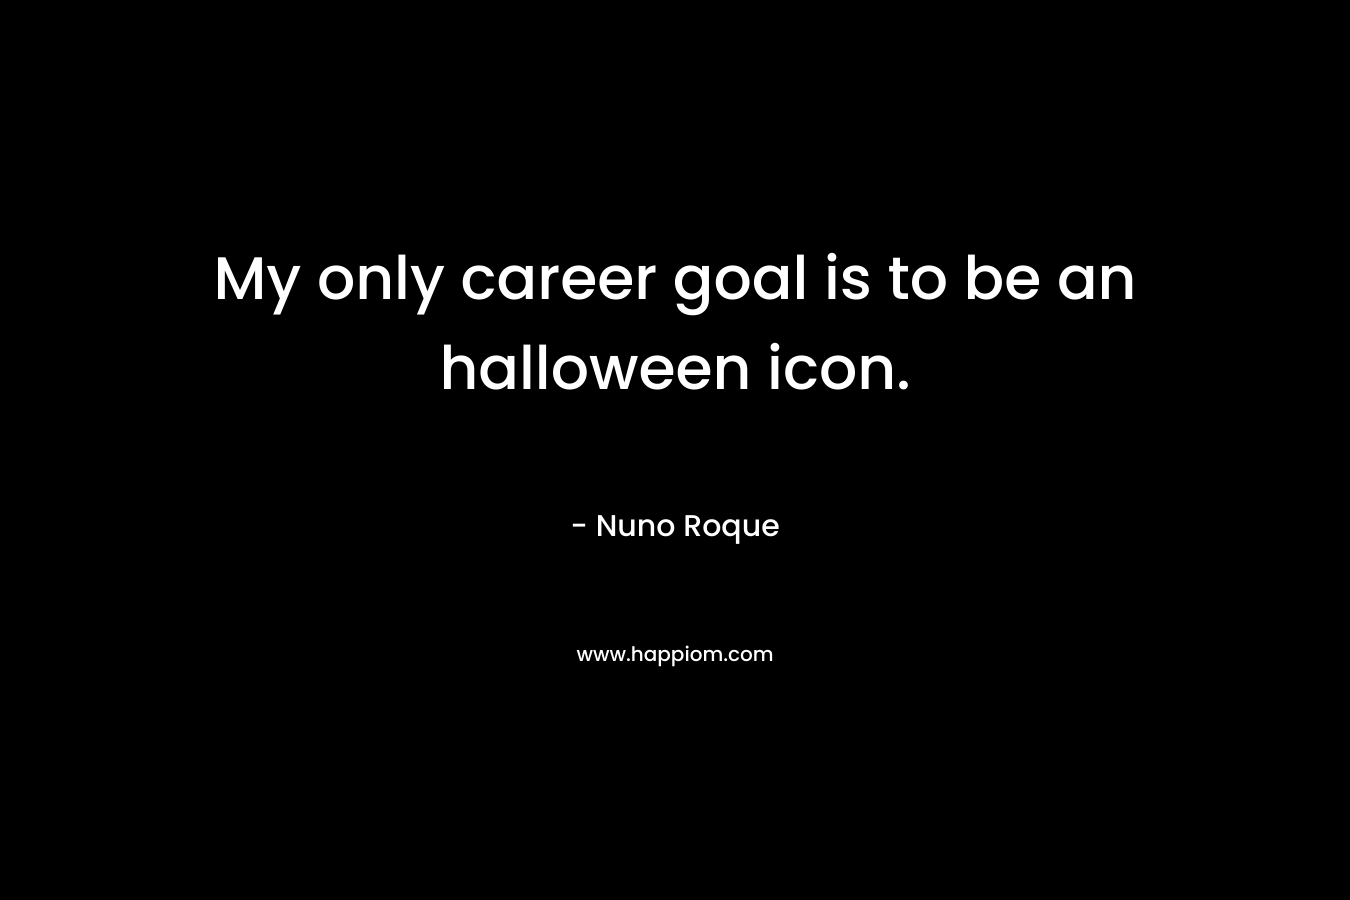 My only career goal is to be an halloween icon. – Nuno Roque